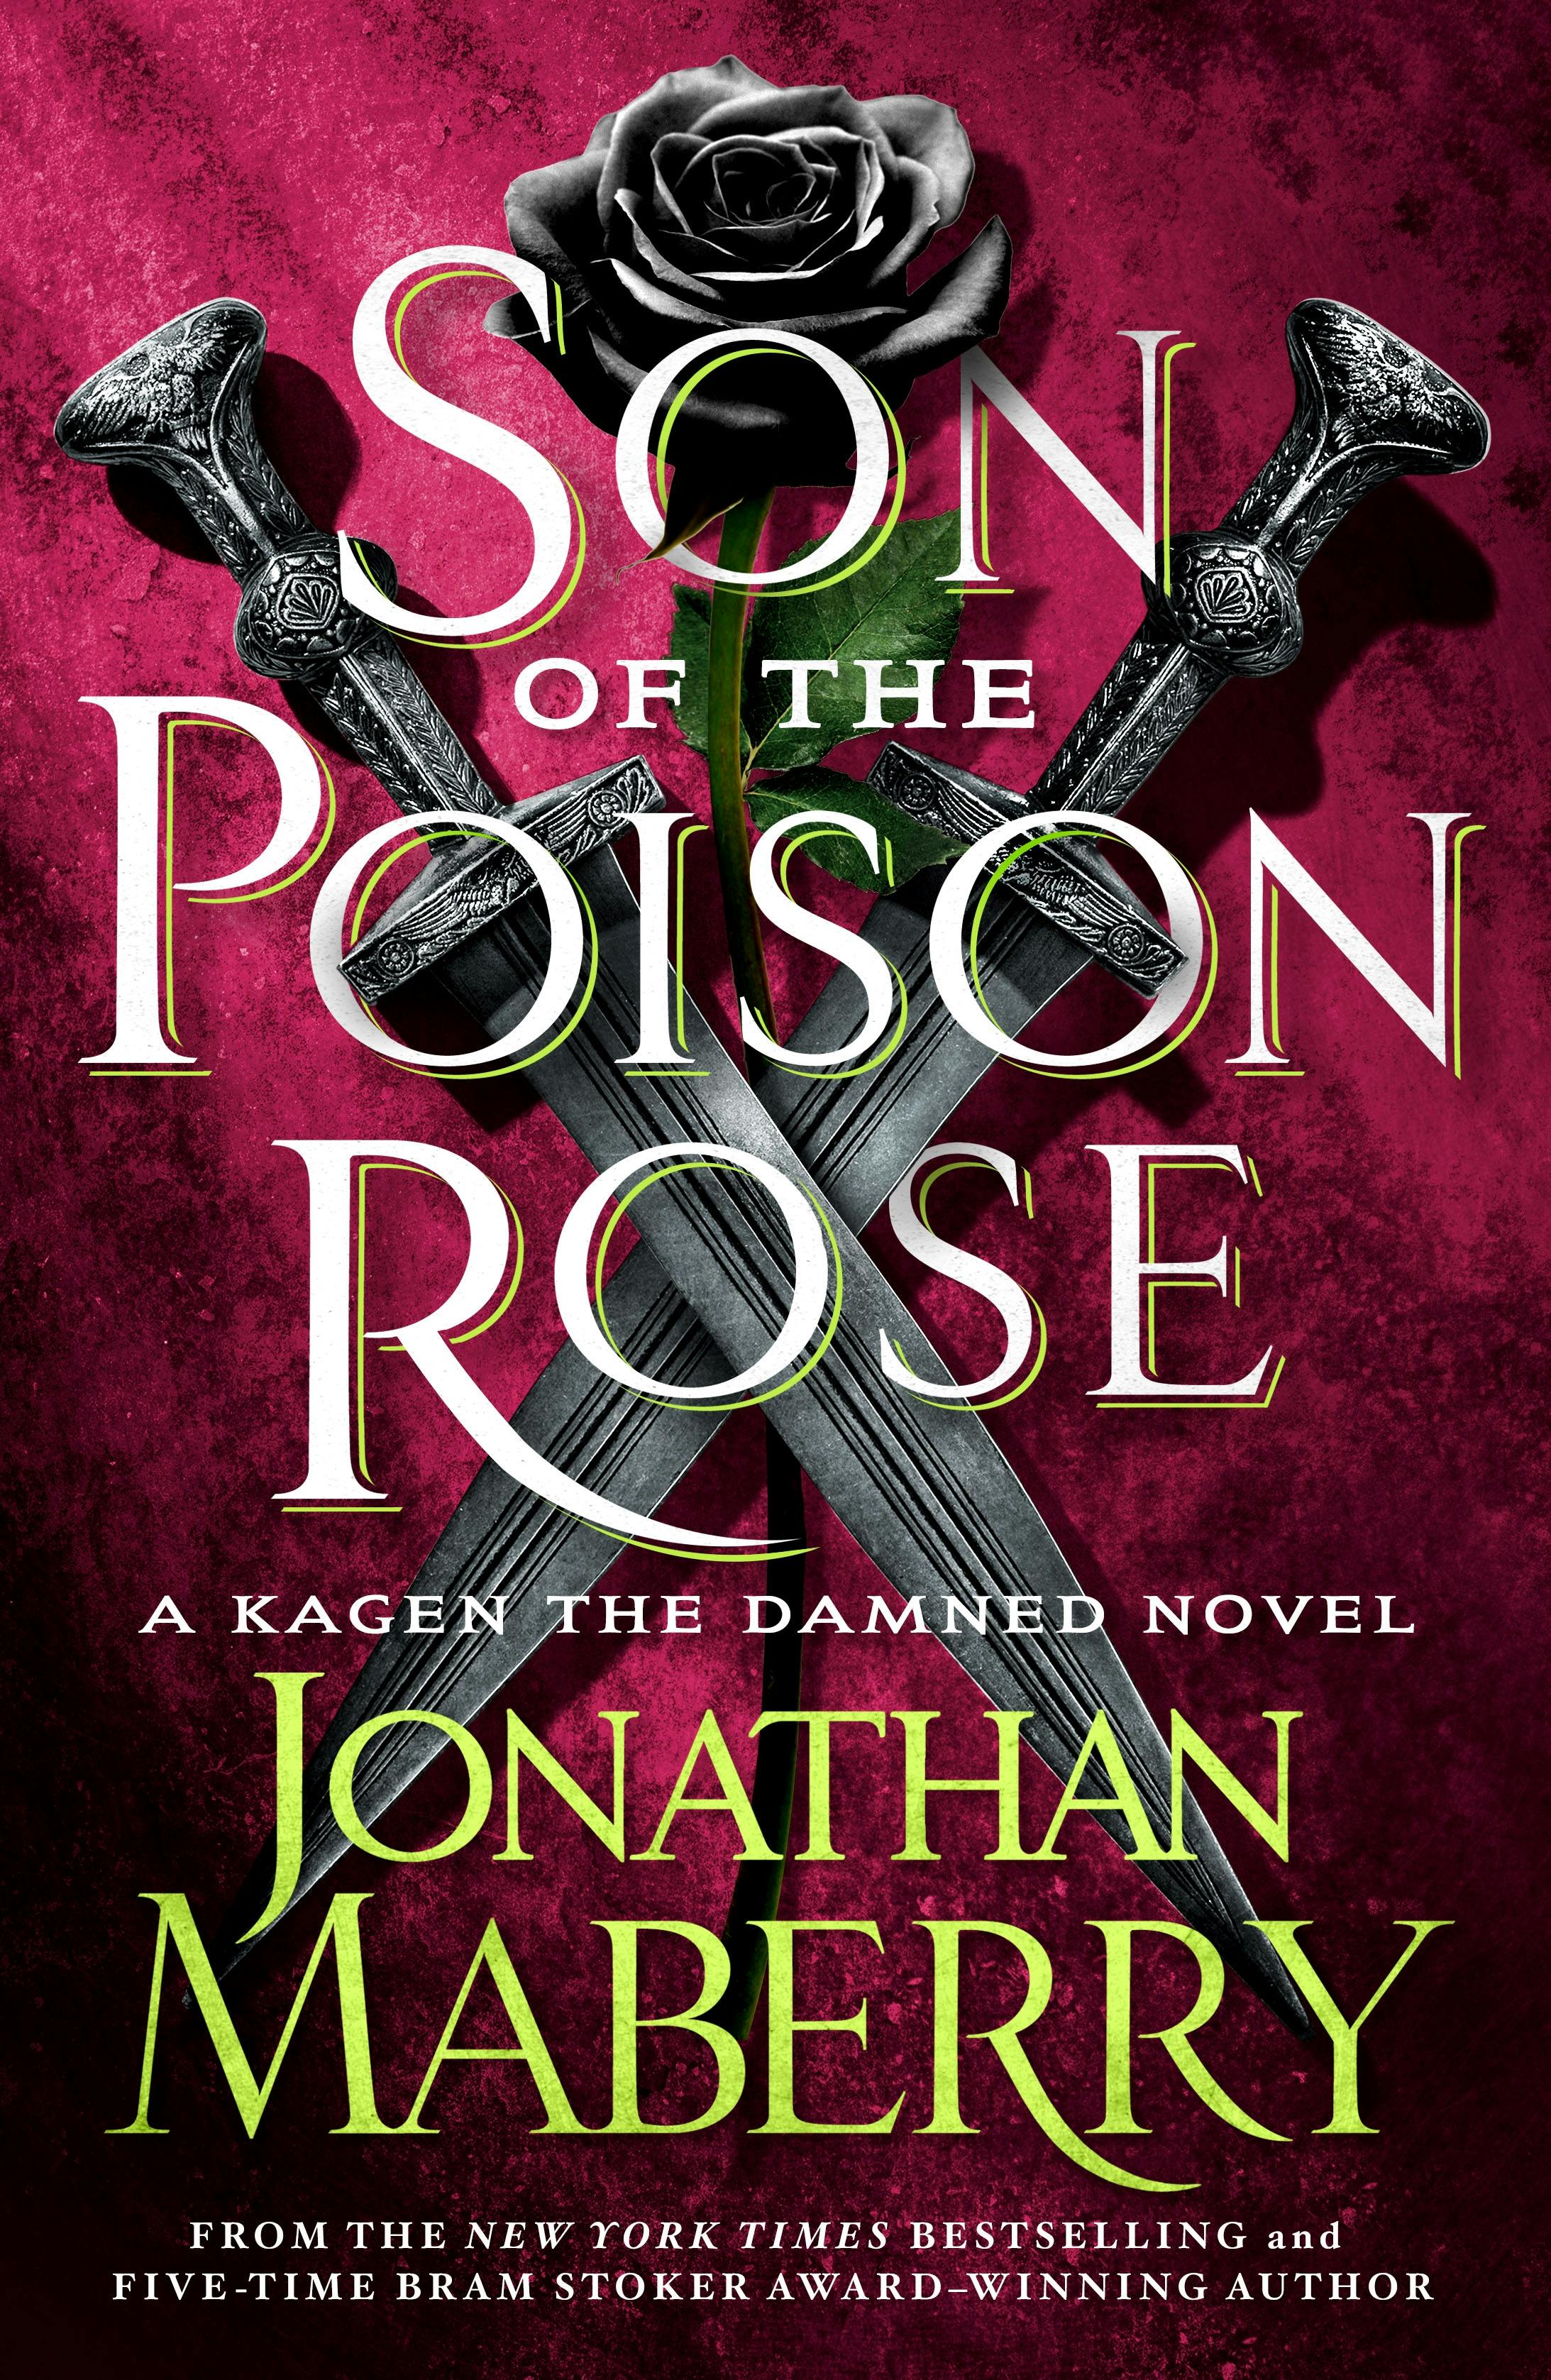 Image of Son of the Poison Rose